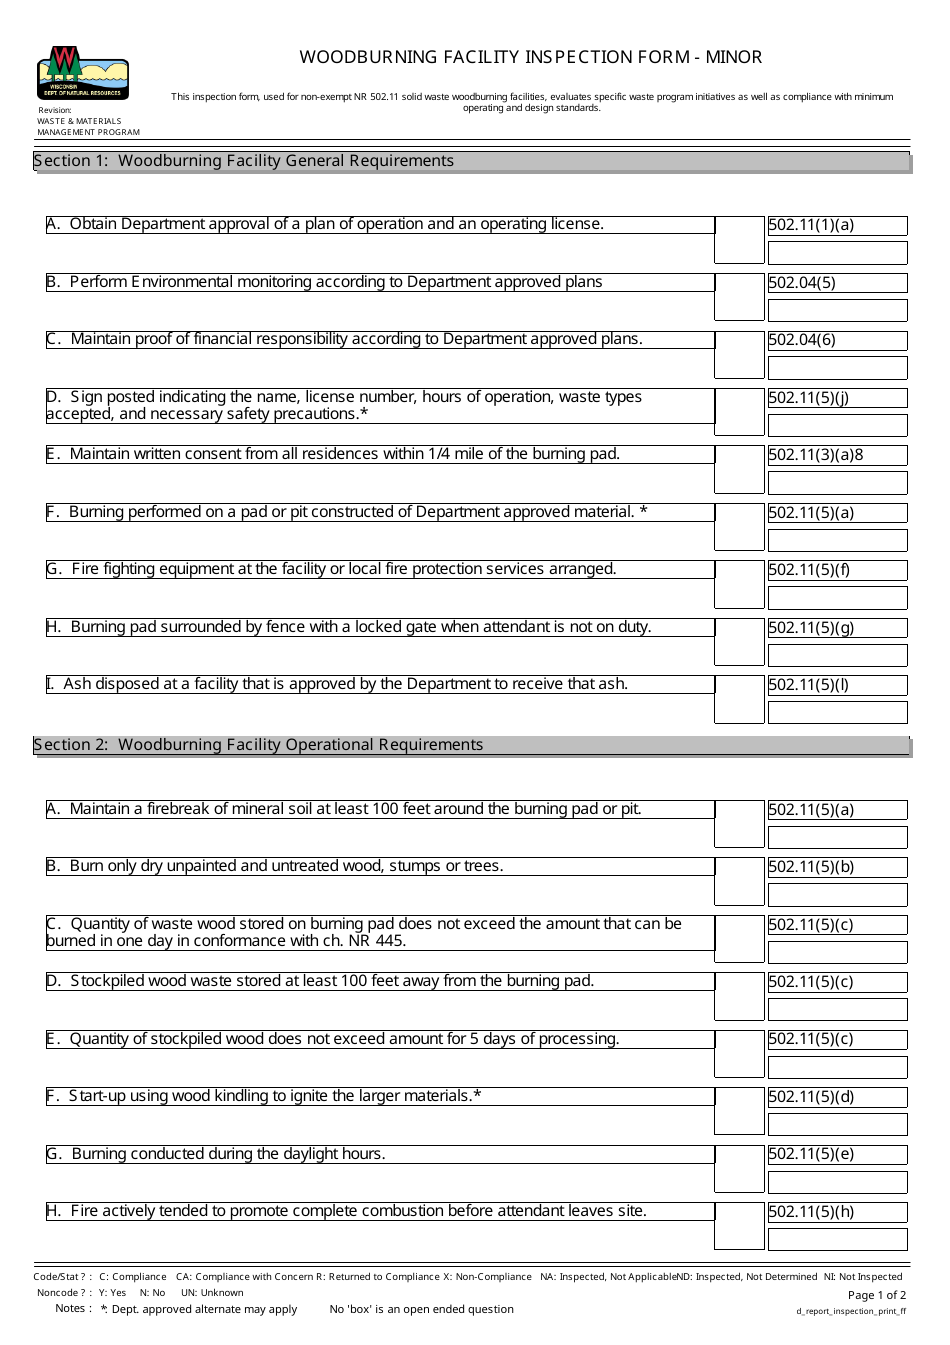 Woodburning Facility Inspection Form - Minor - Wisconsin, Page 1